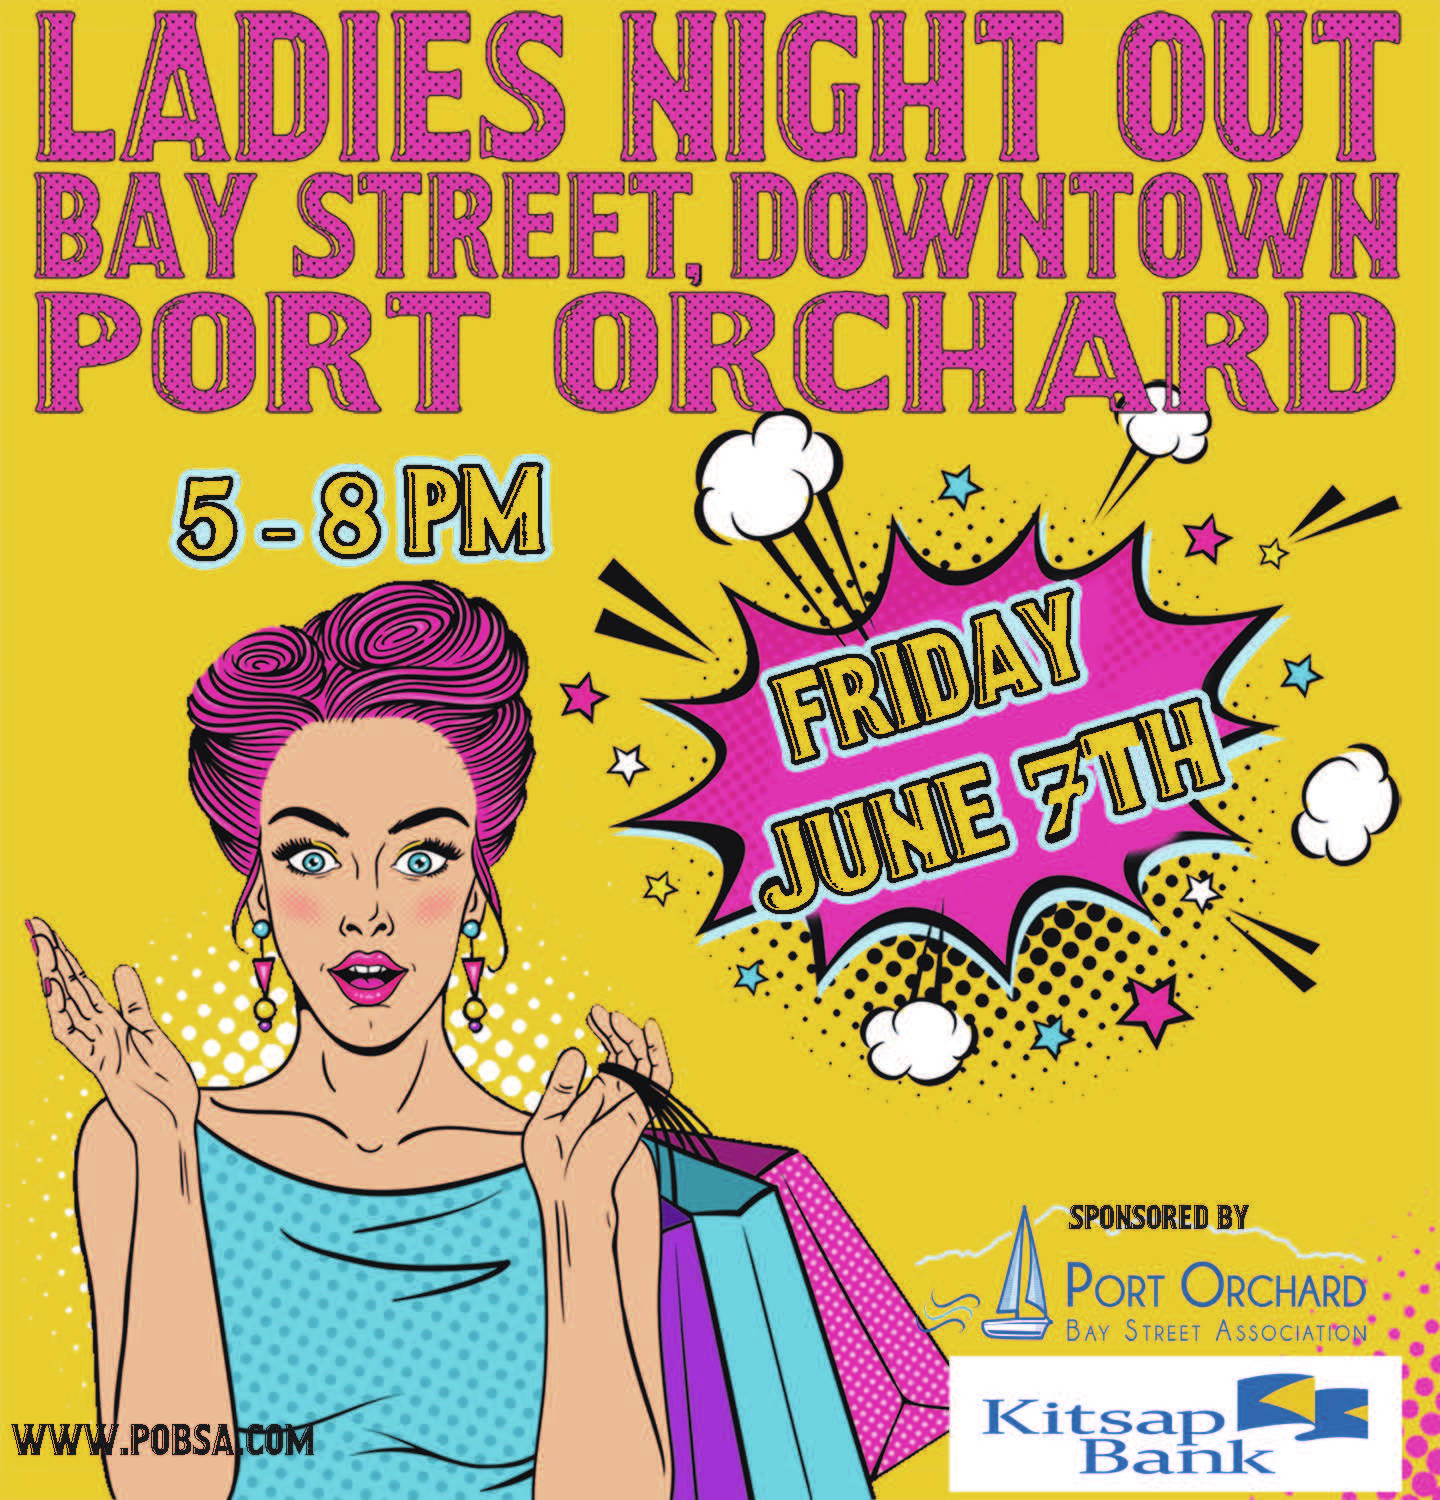 ‘Ladies Night Out’ set for June 7